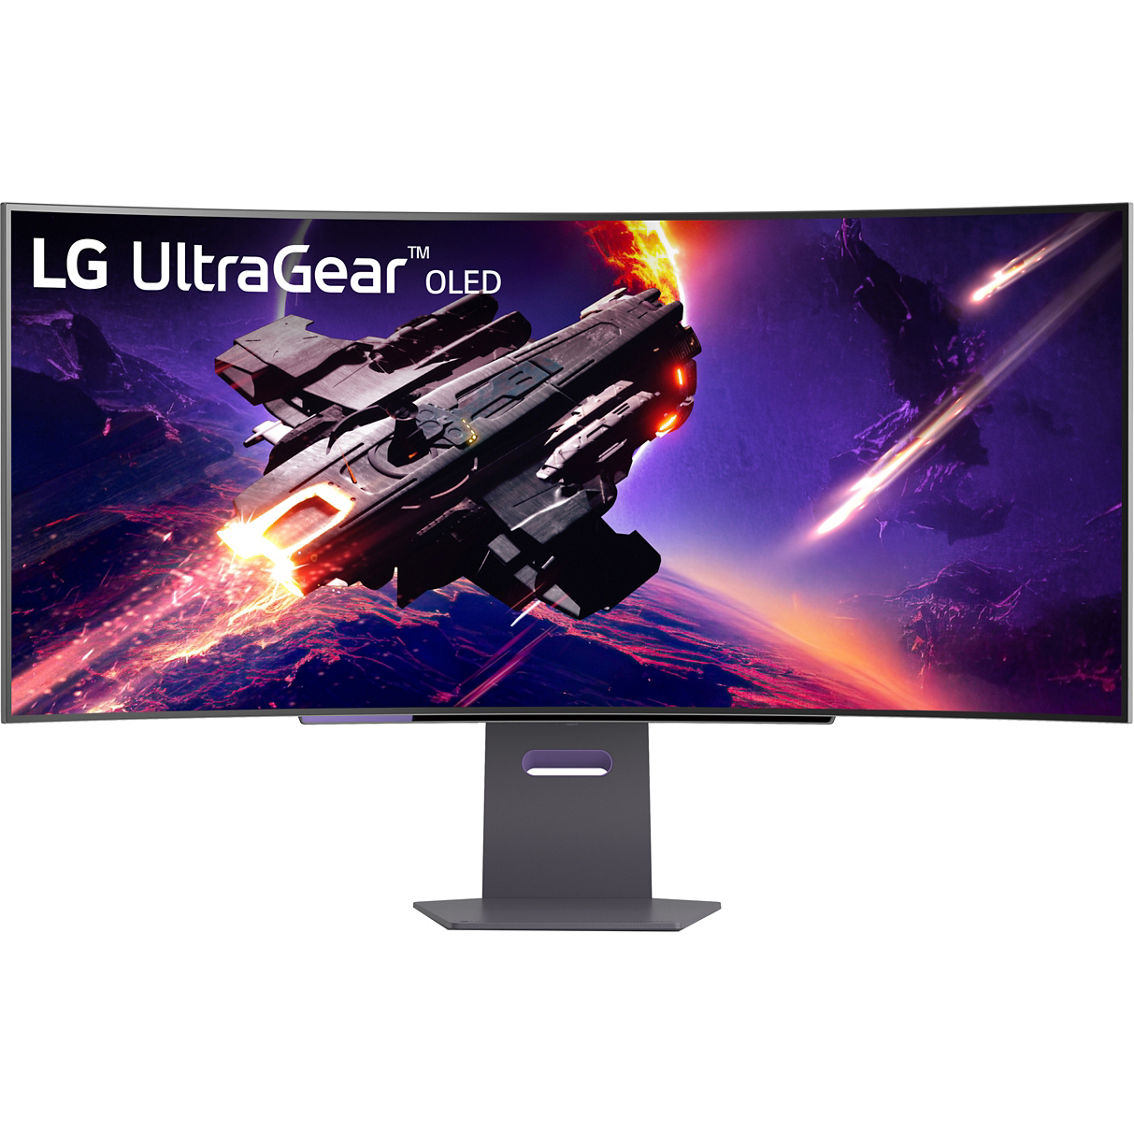 LG 45 in. UltraGear OLED Curved 240Hz WQHD Gaming Monitor with G-SYNC 45GS95QE-B - Image 6 of 7